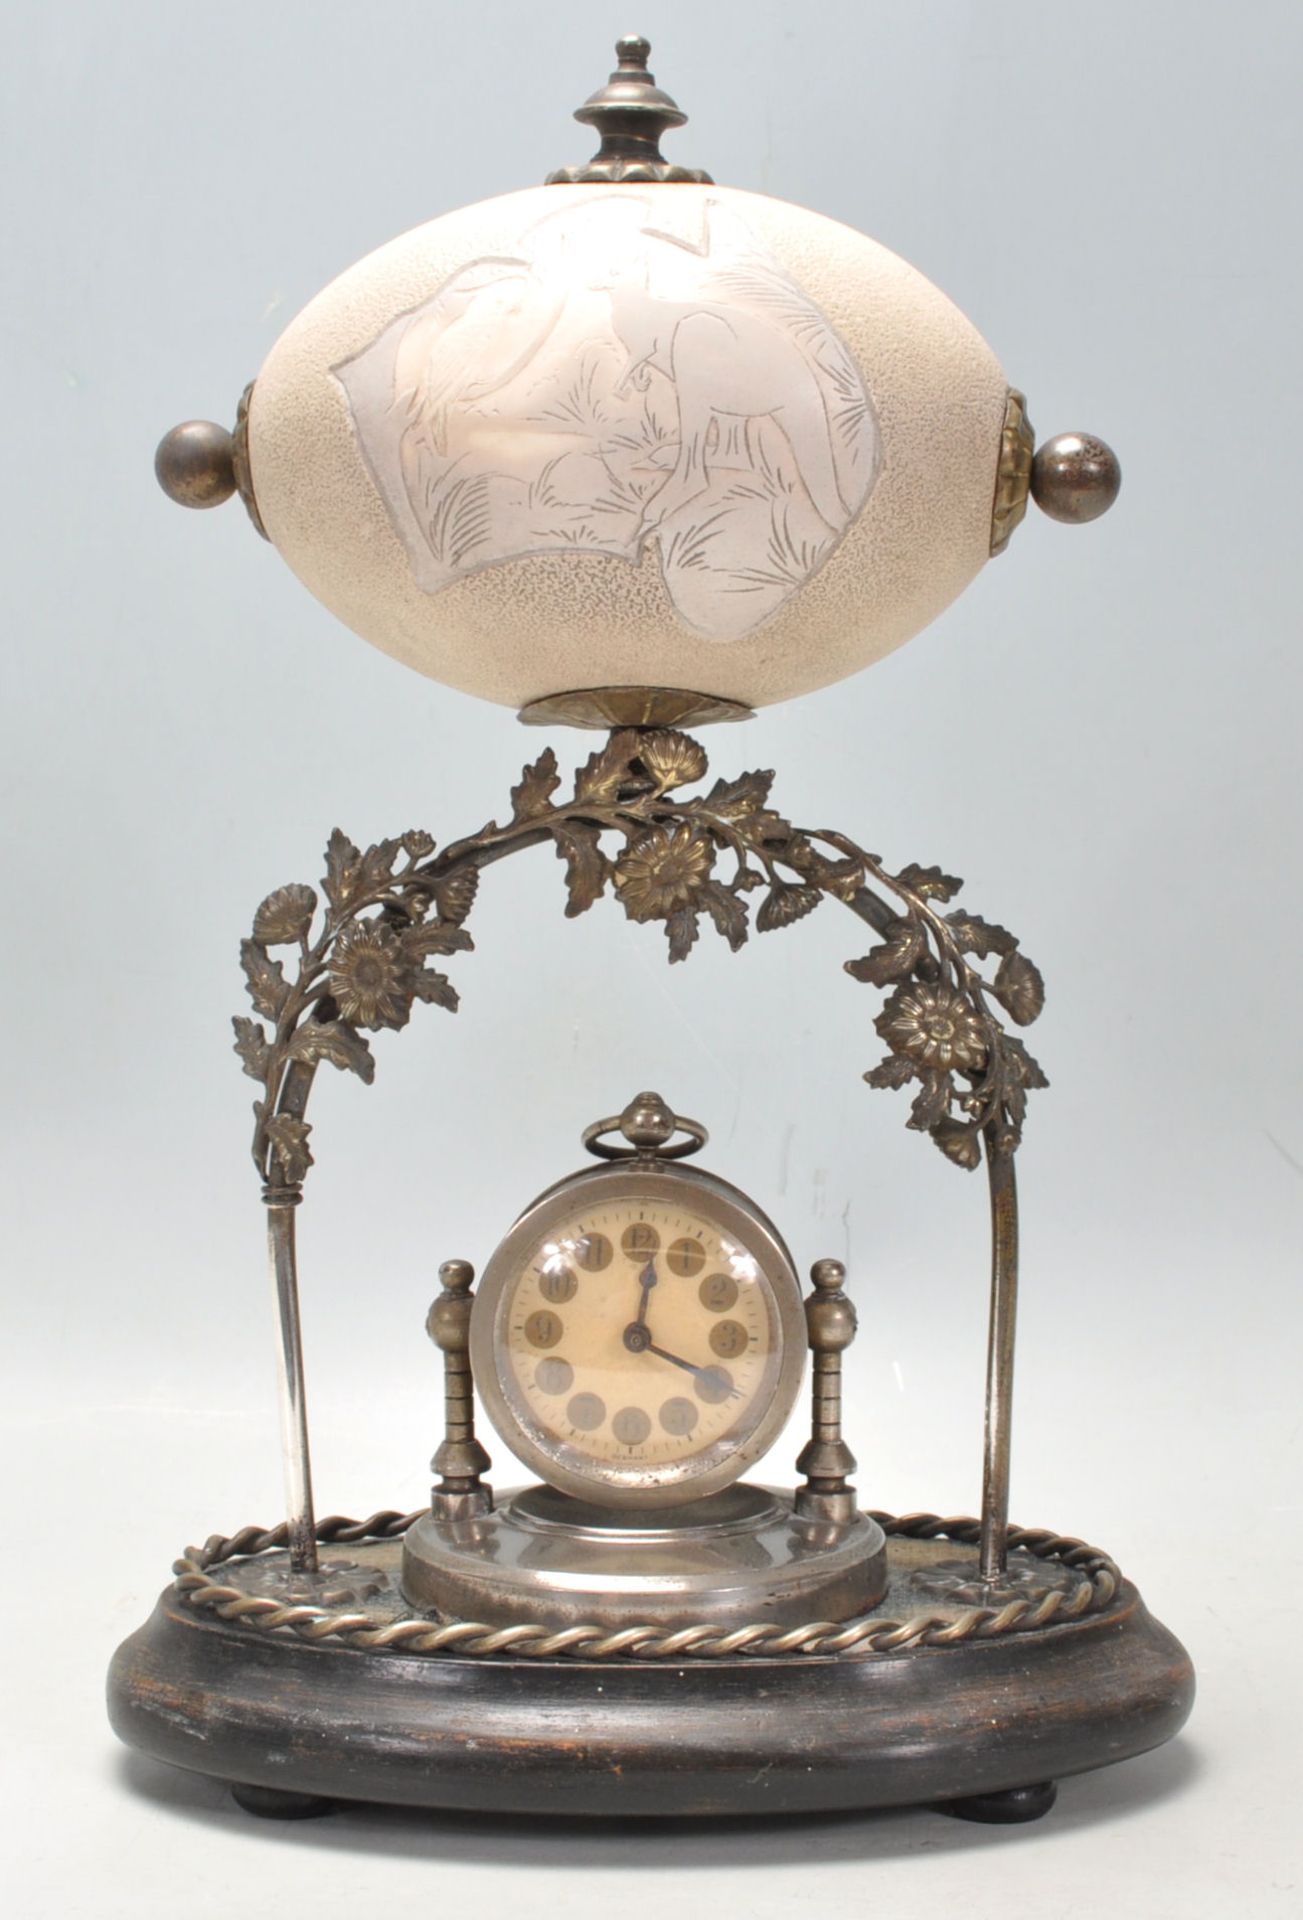 A 19th Century Victorian carved emu egg mantle clock depicting a kangaroo and a large bird with an